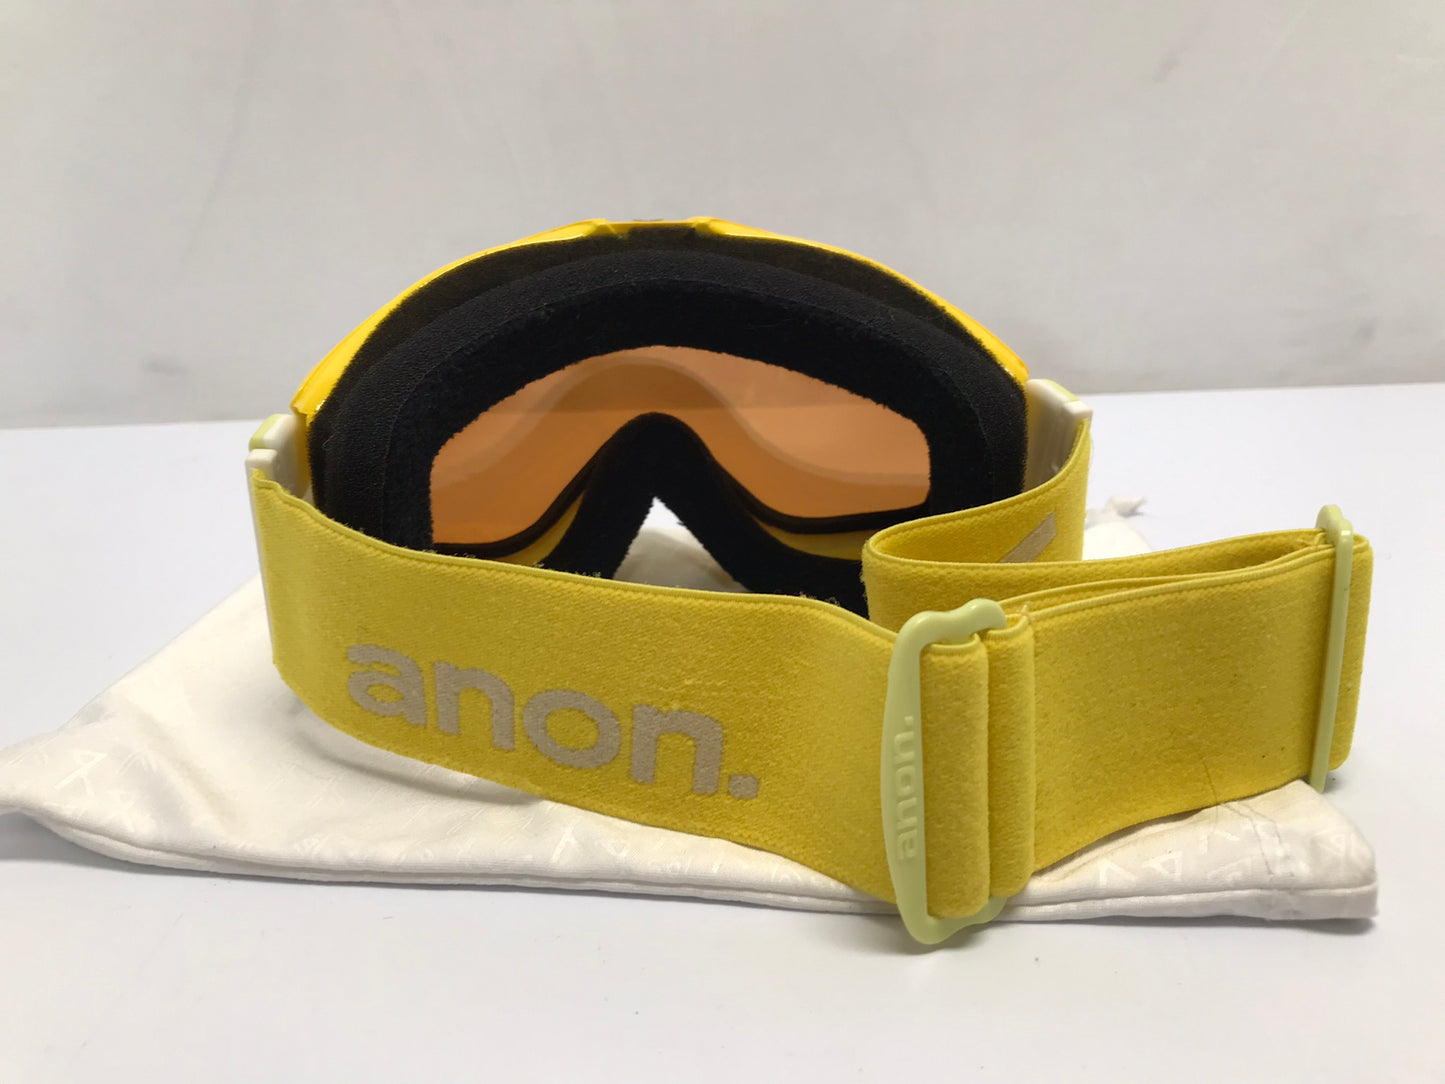 Ski Goggles Adult Size Medium Anon Yellow and Black Excellent